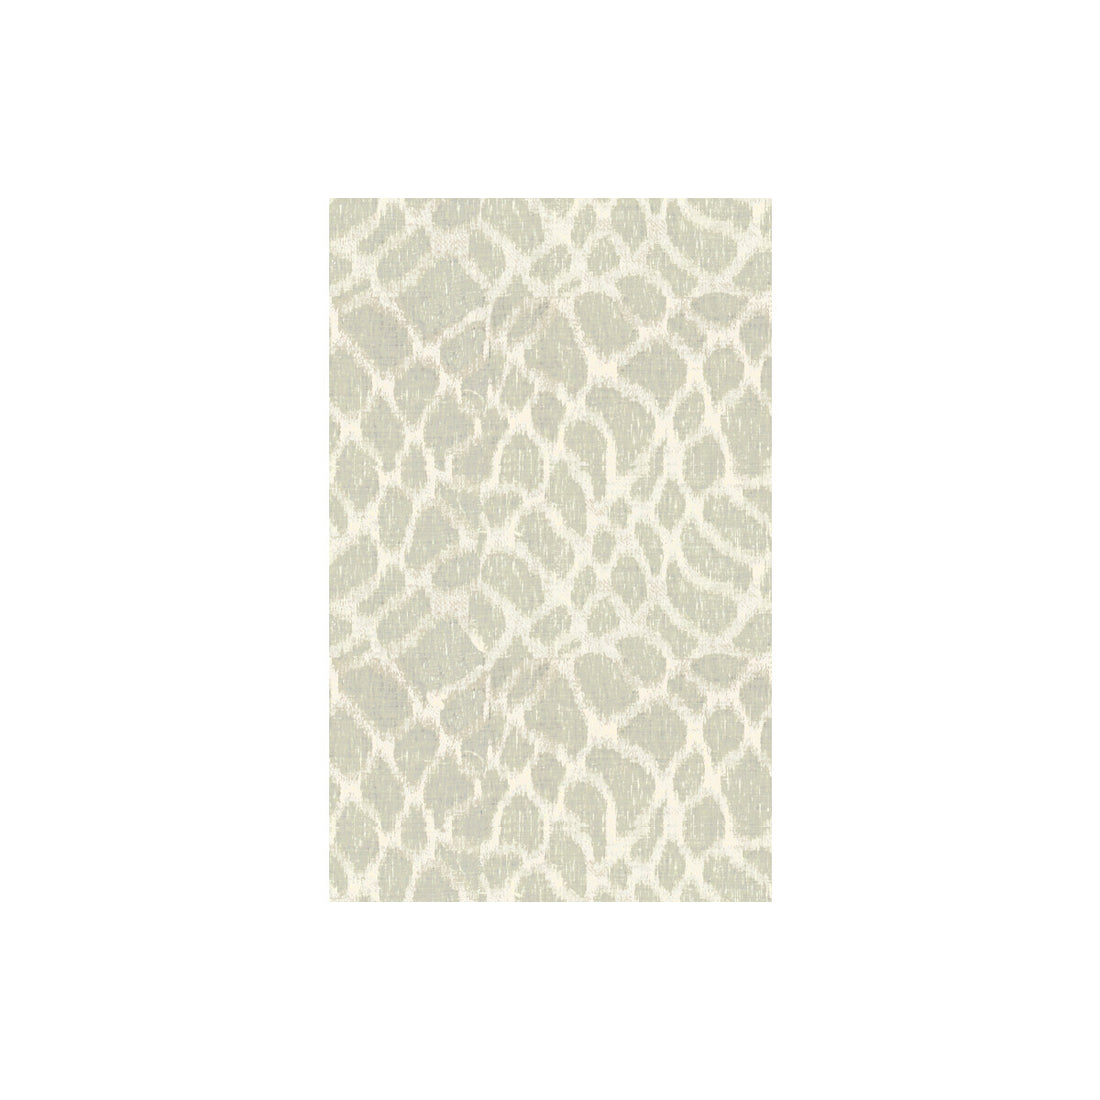 Anet fabric in gull color - pattern 3948.101.0 - by Kravet Basics in the Jeffrey Alan Marks collection